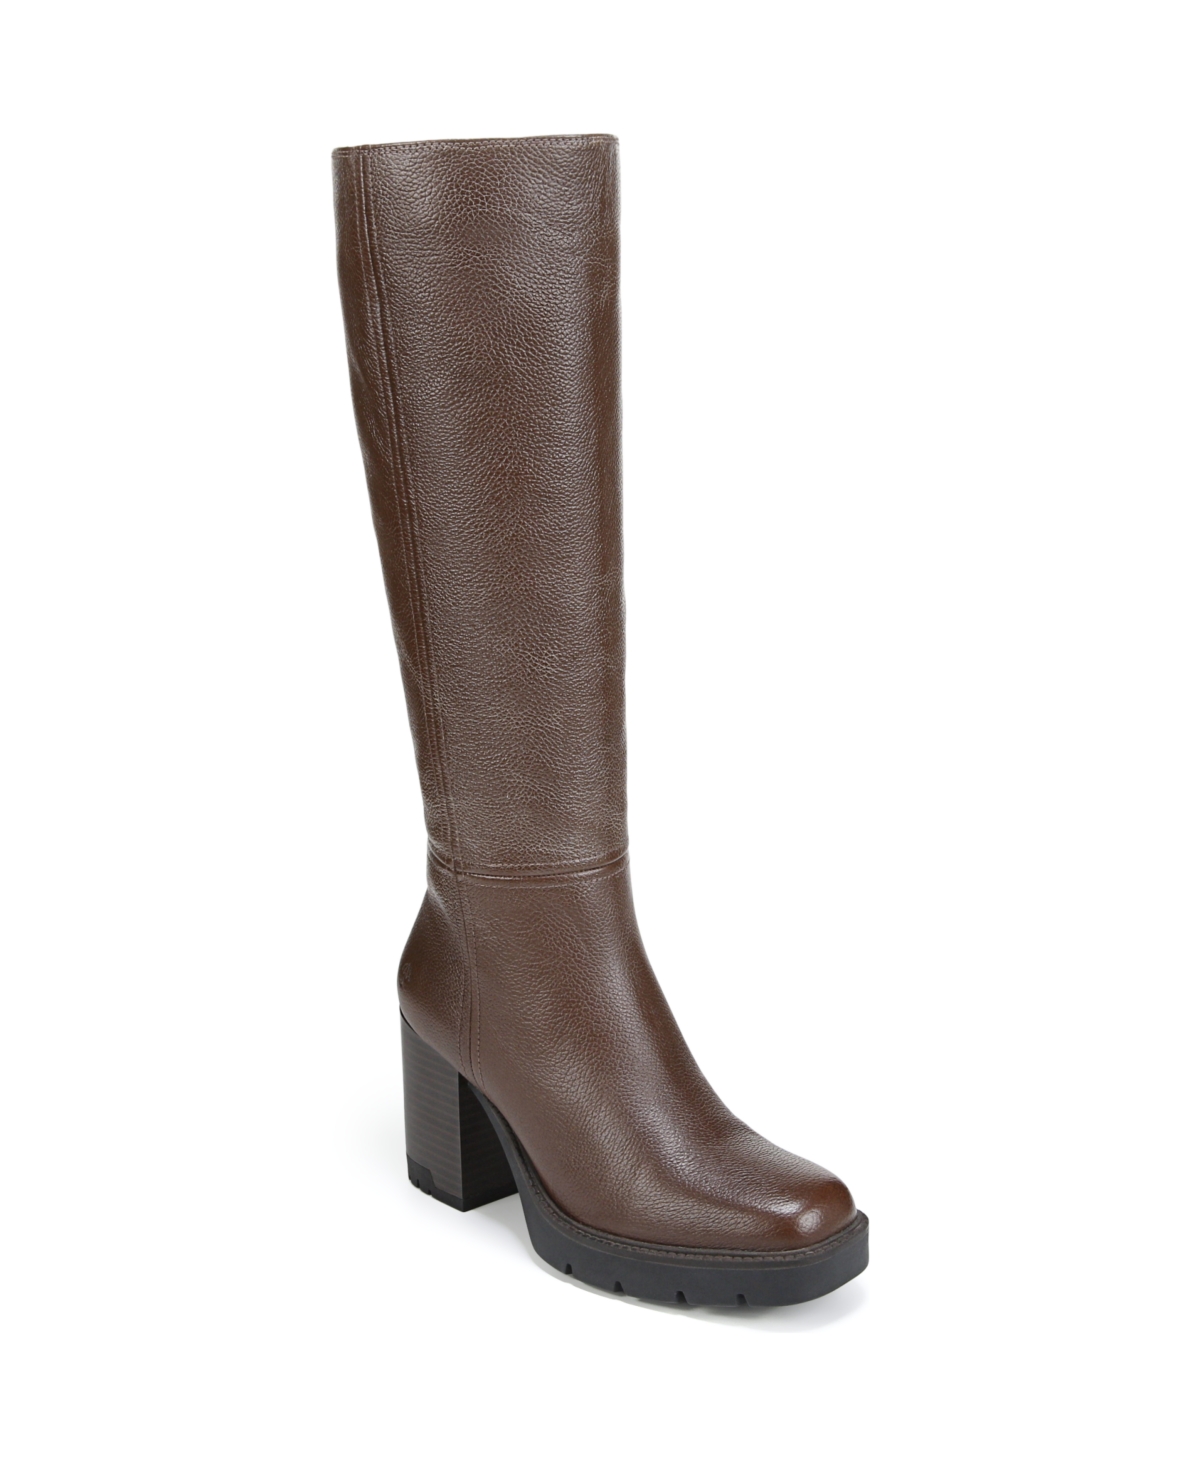 Willow Lug Sole Tall Boots - Chocolate Brown Leather